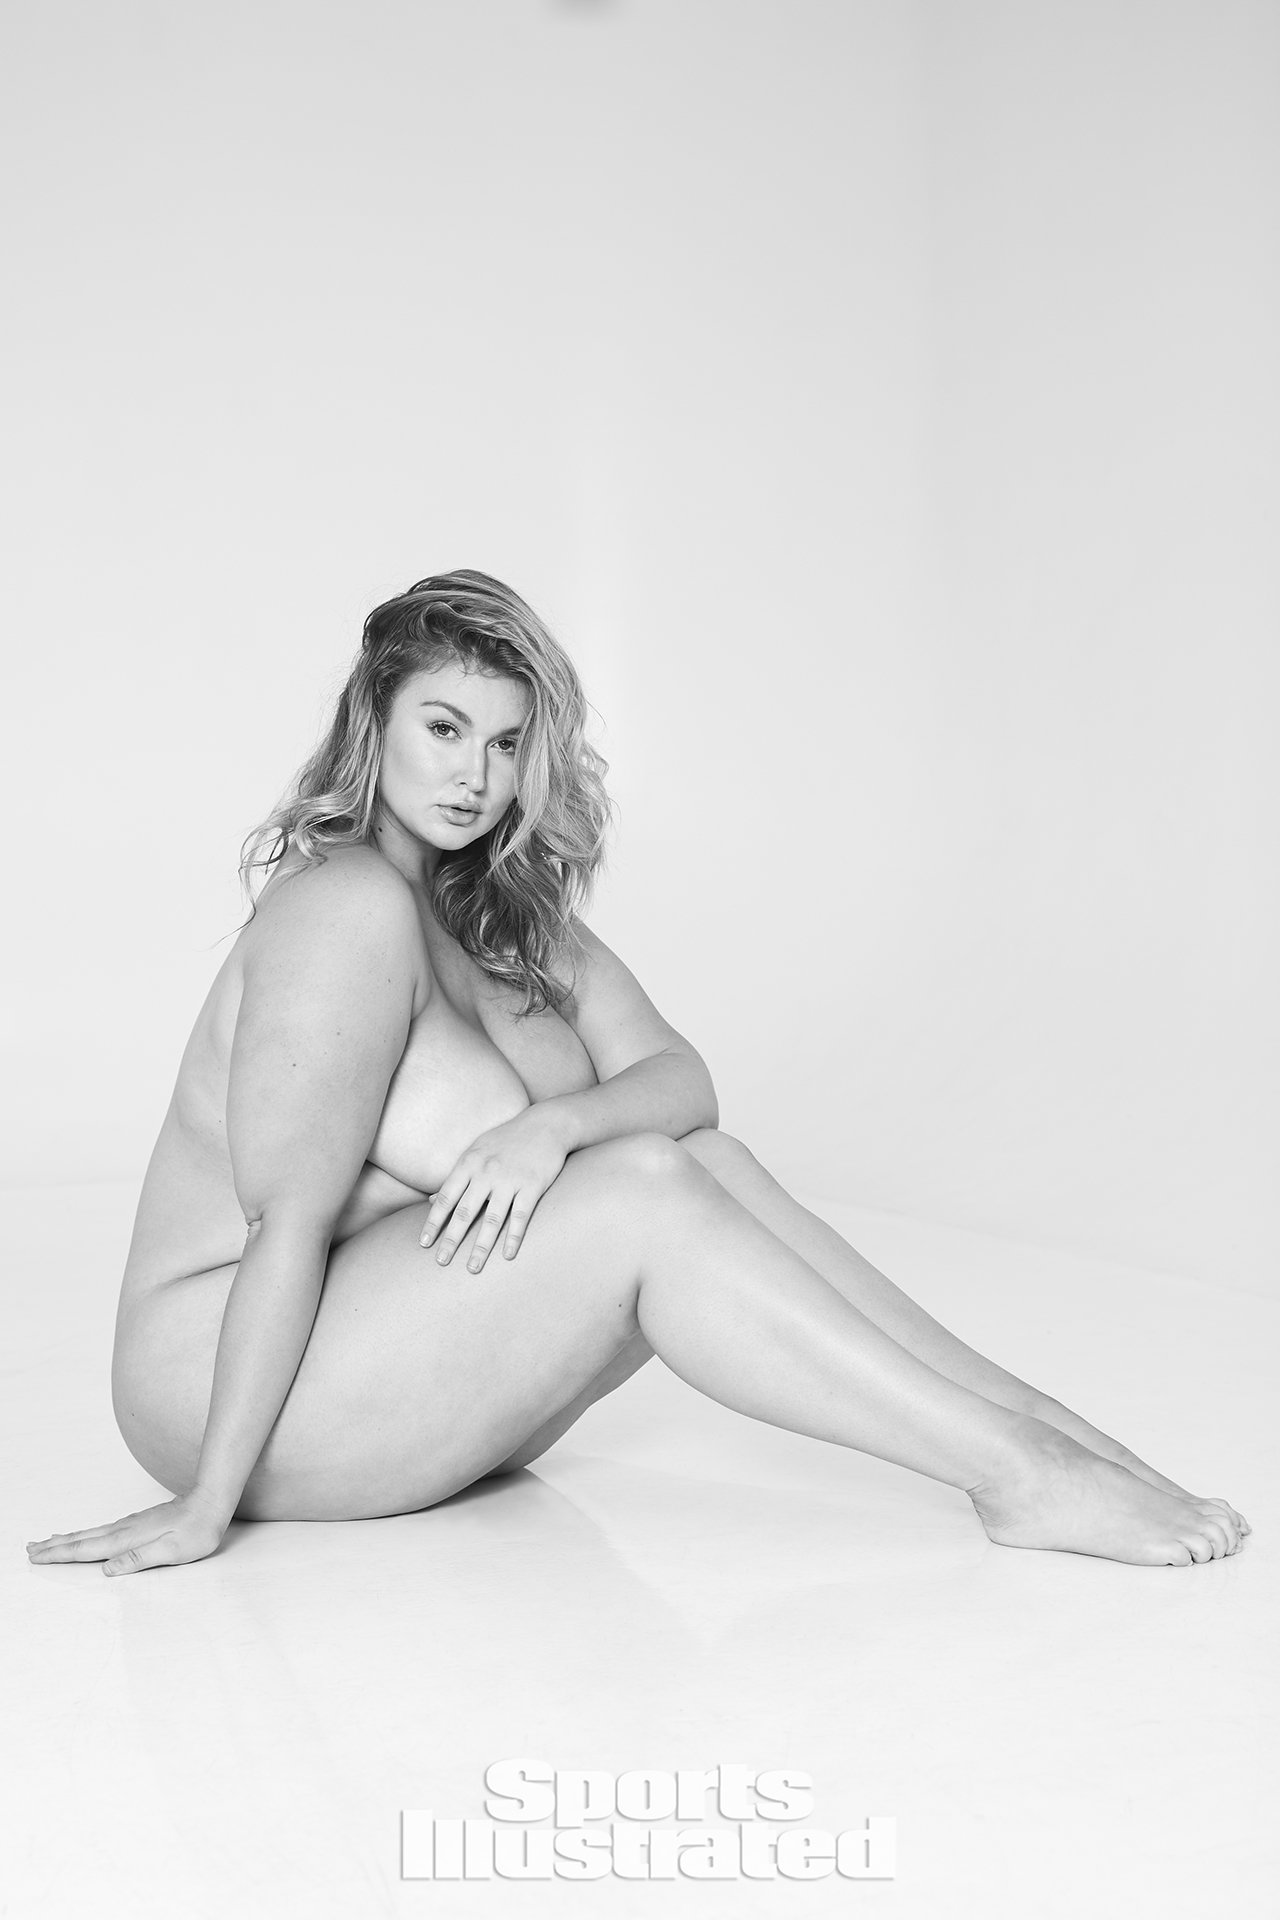 dillah doang recommends Hunter Mcgrady Nude